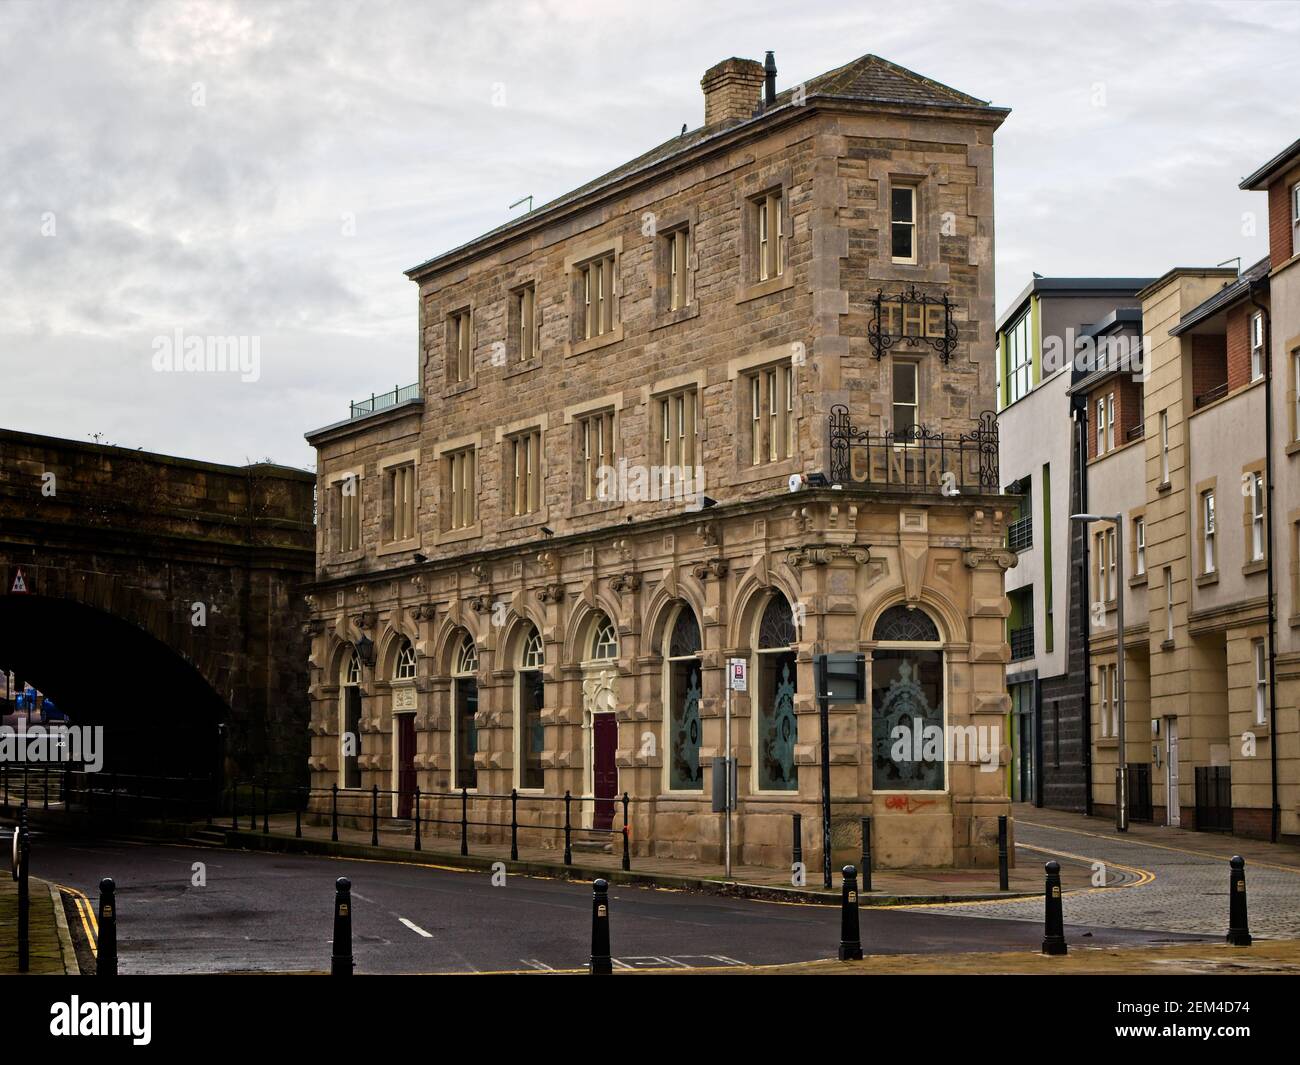 The Central public house is an old wedge shaped building standing proudly on Half Moon Lane in Gateshead, Tyne and Wear. Stock Photo